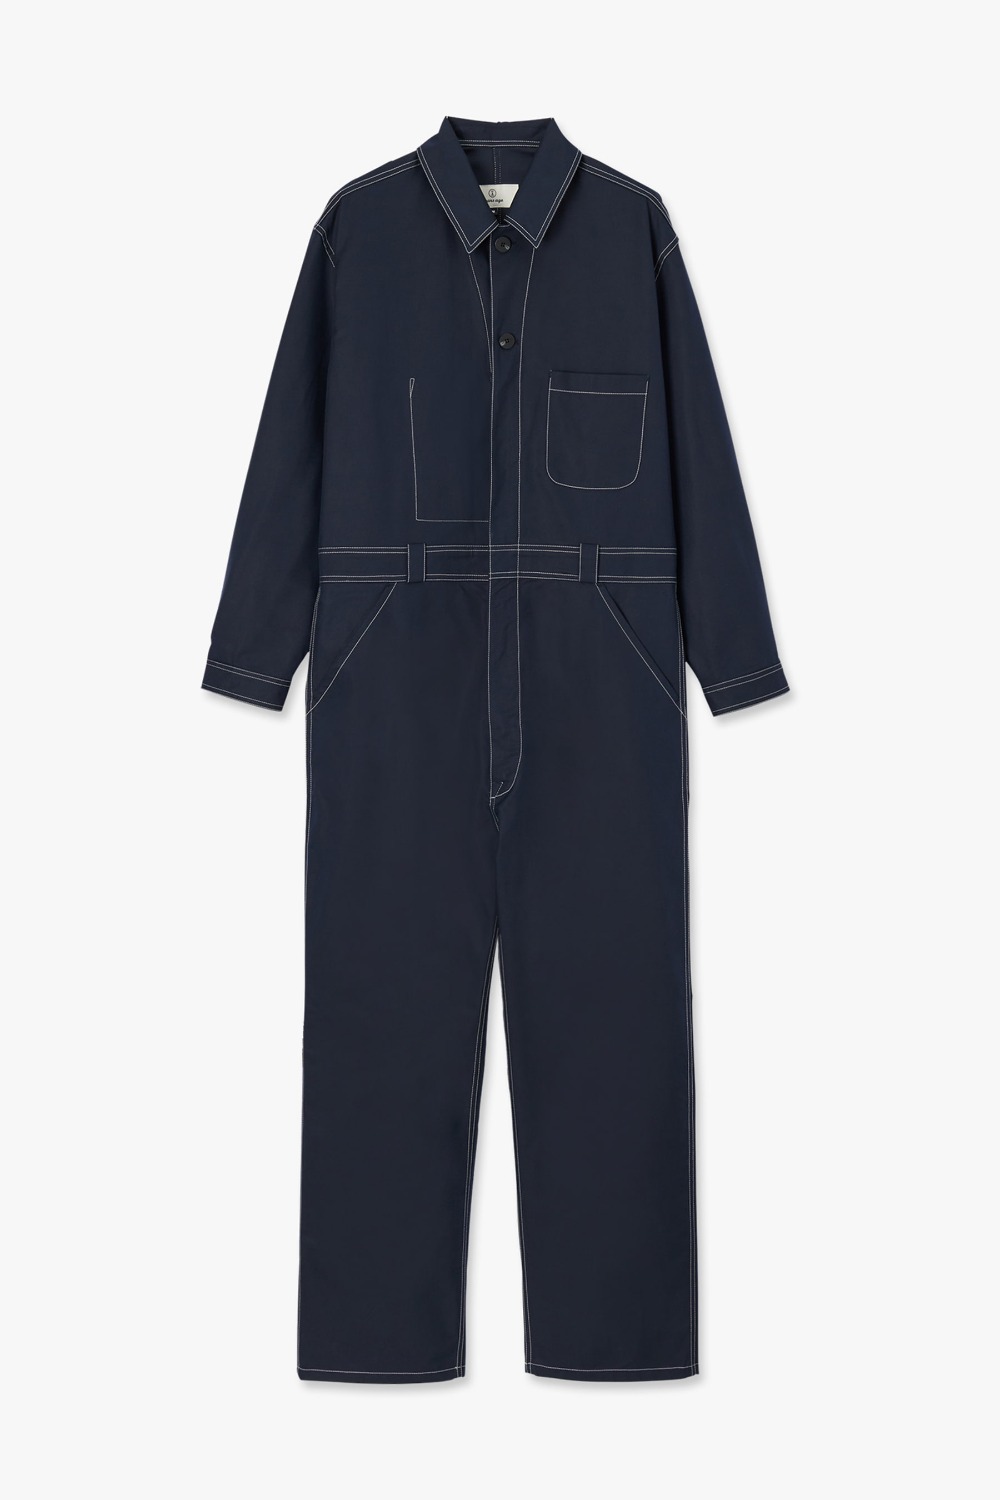 NAVY WASHED MECHANIC SUIT